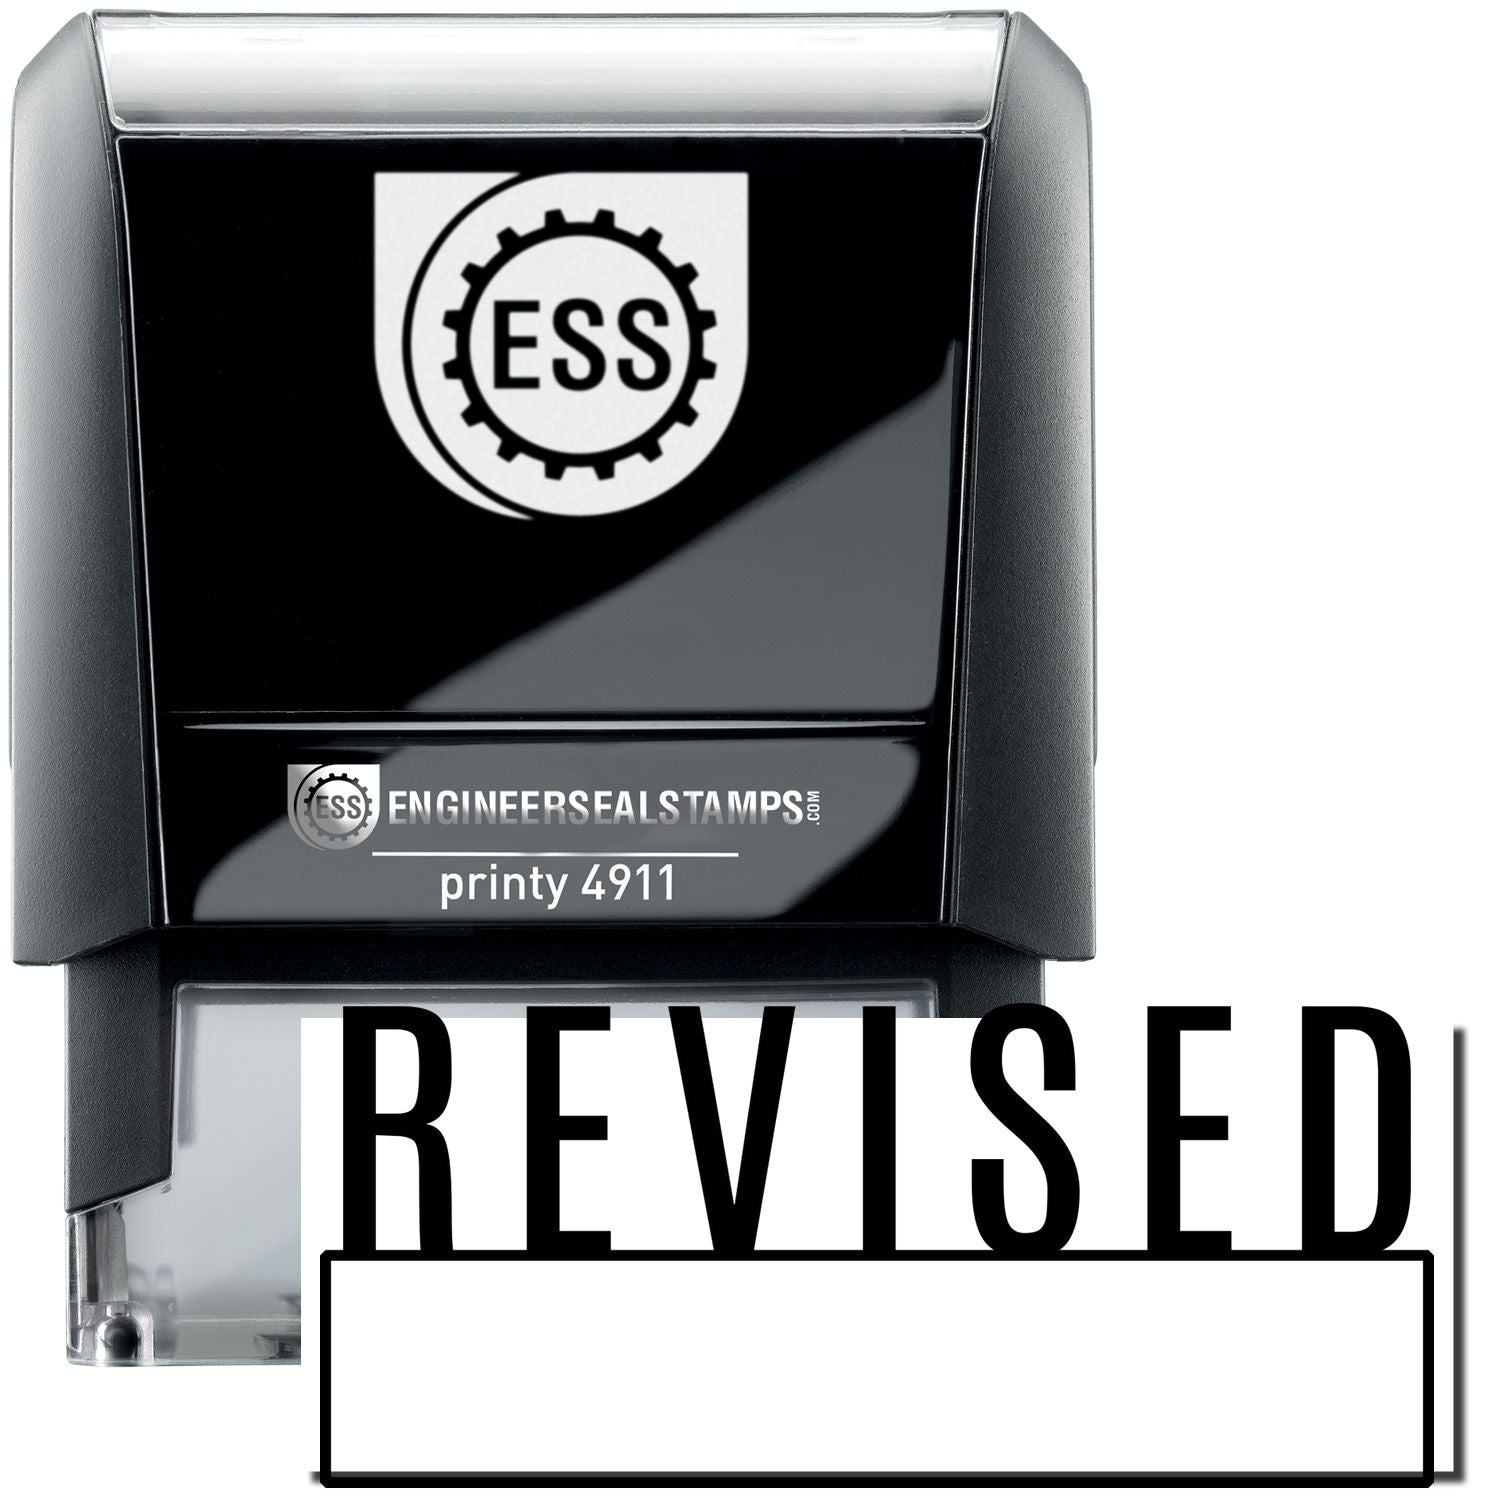 A self-inking stamp with a stamped image showing how the text "REVISED" with a box under it is displayed after stamping.